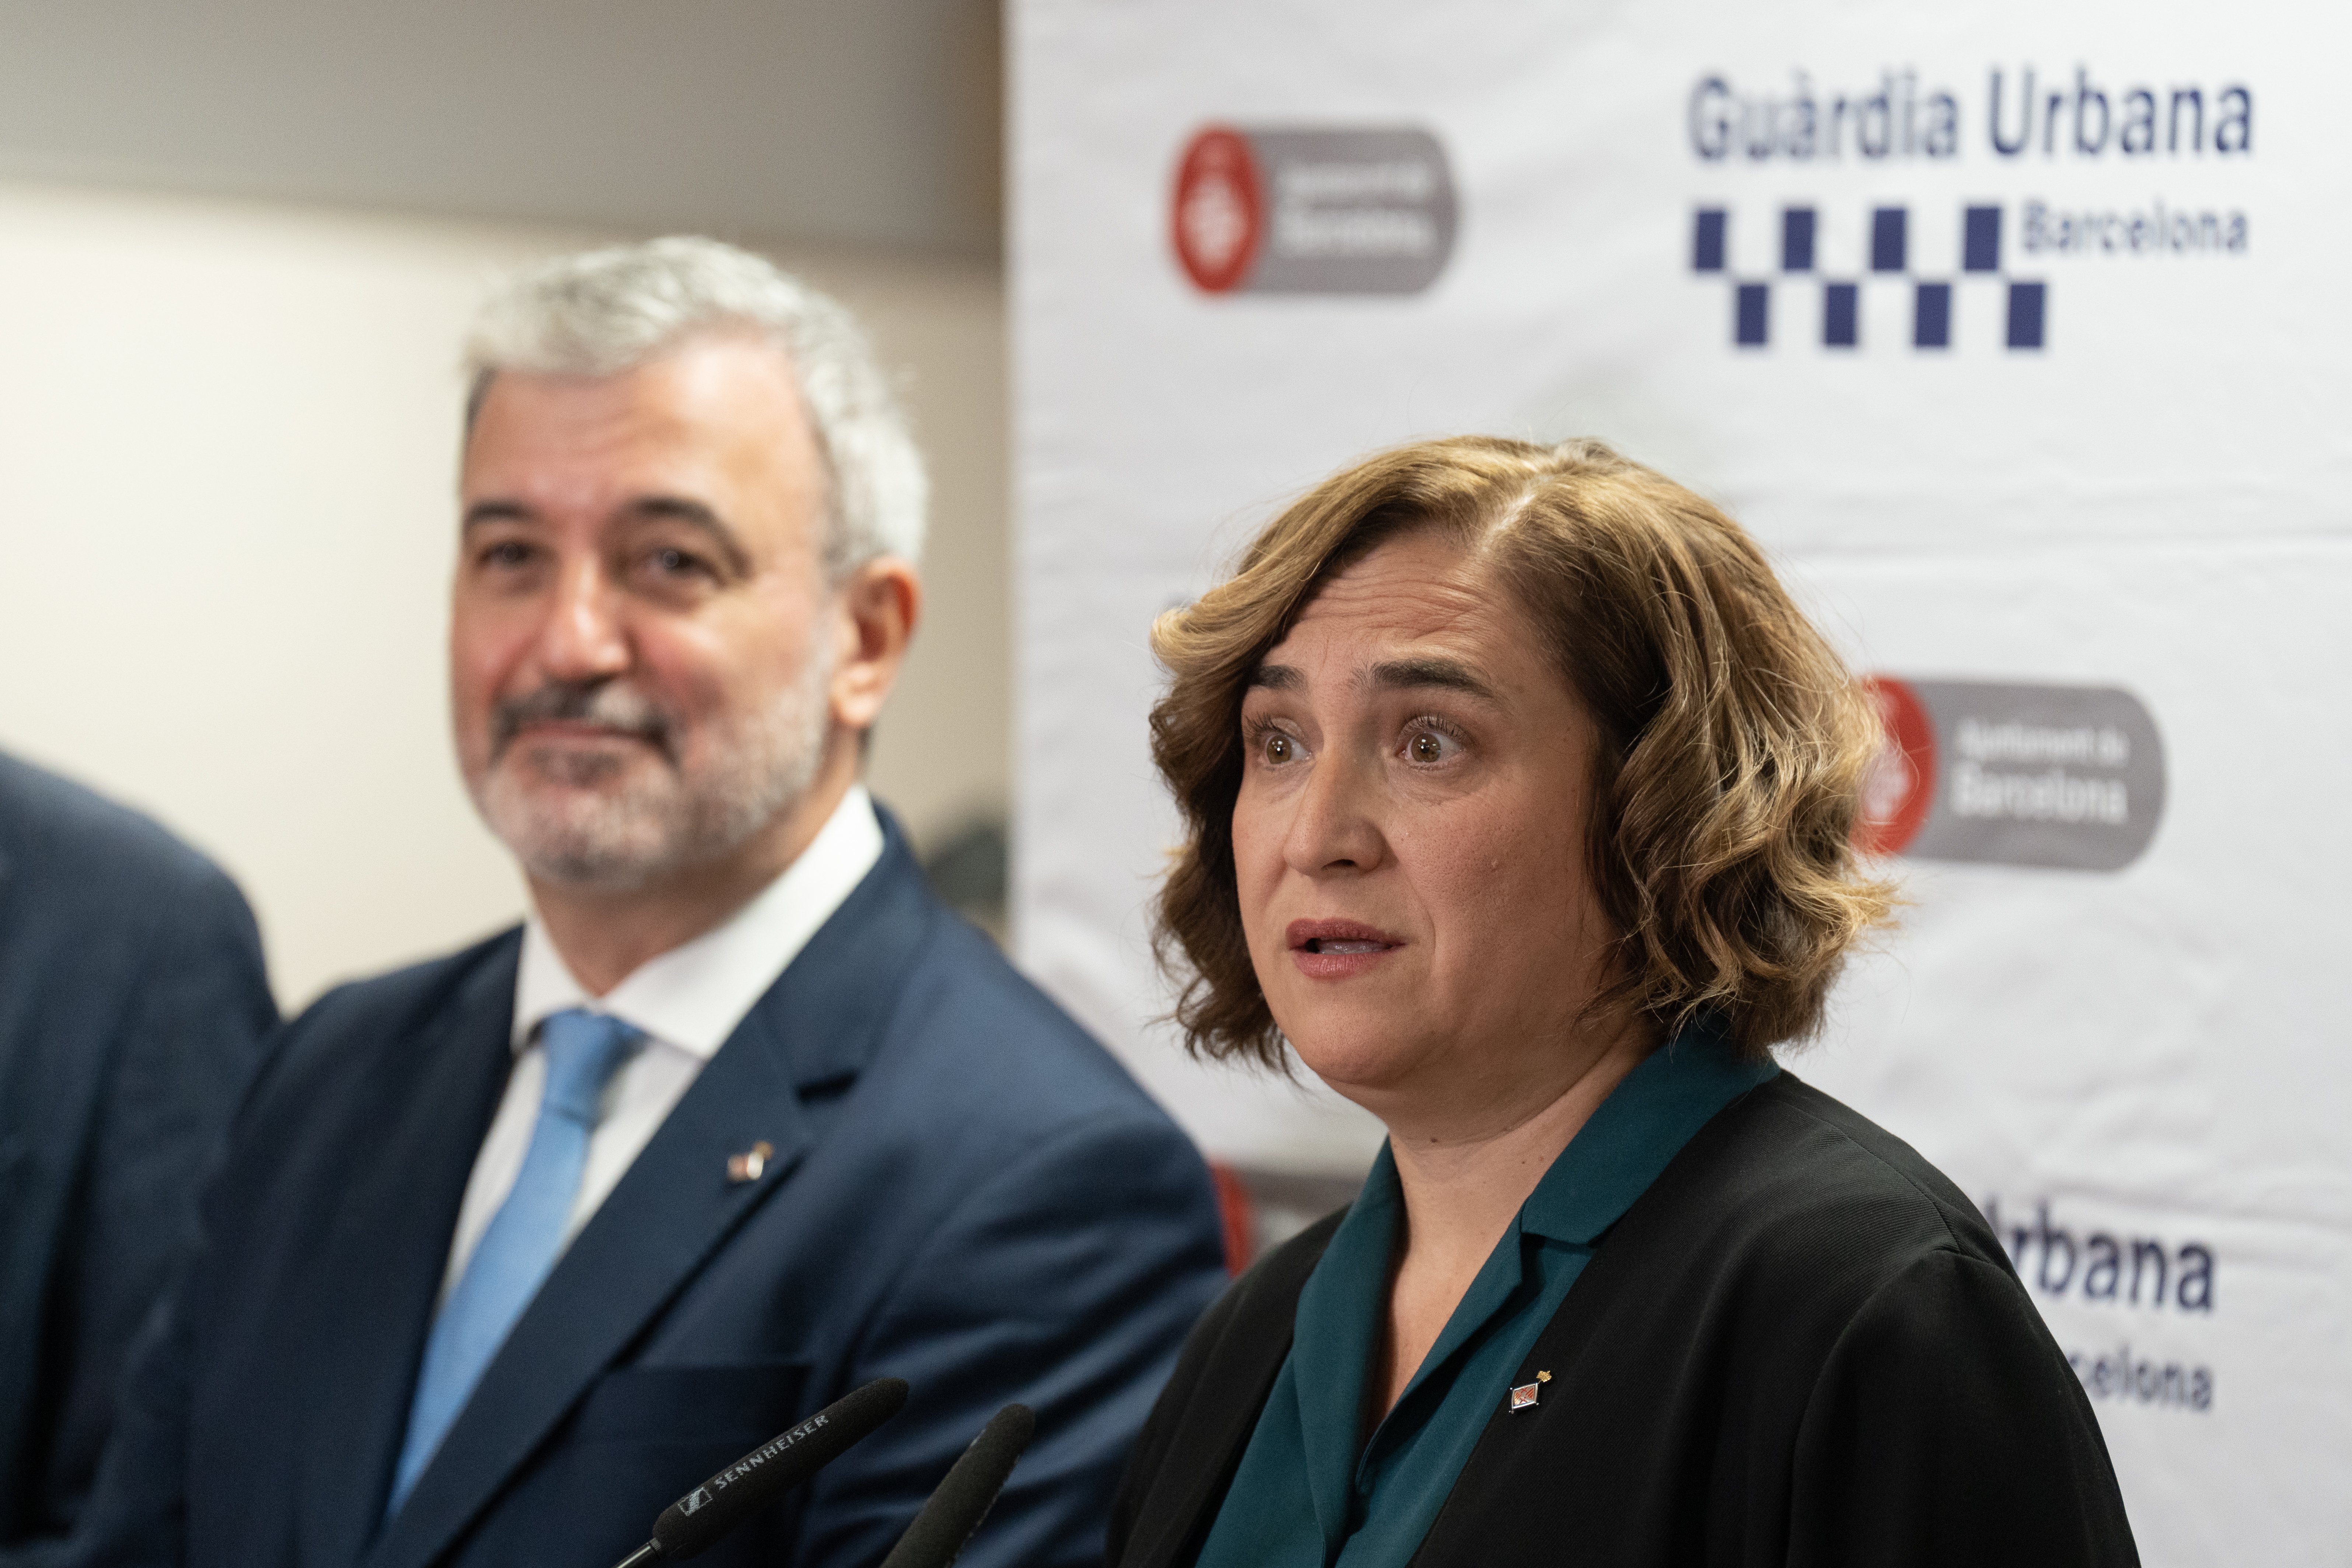 CIS poll predicts an Ada Colau victory in Barcelona mayoral race as campaign opens